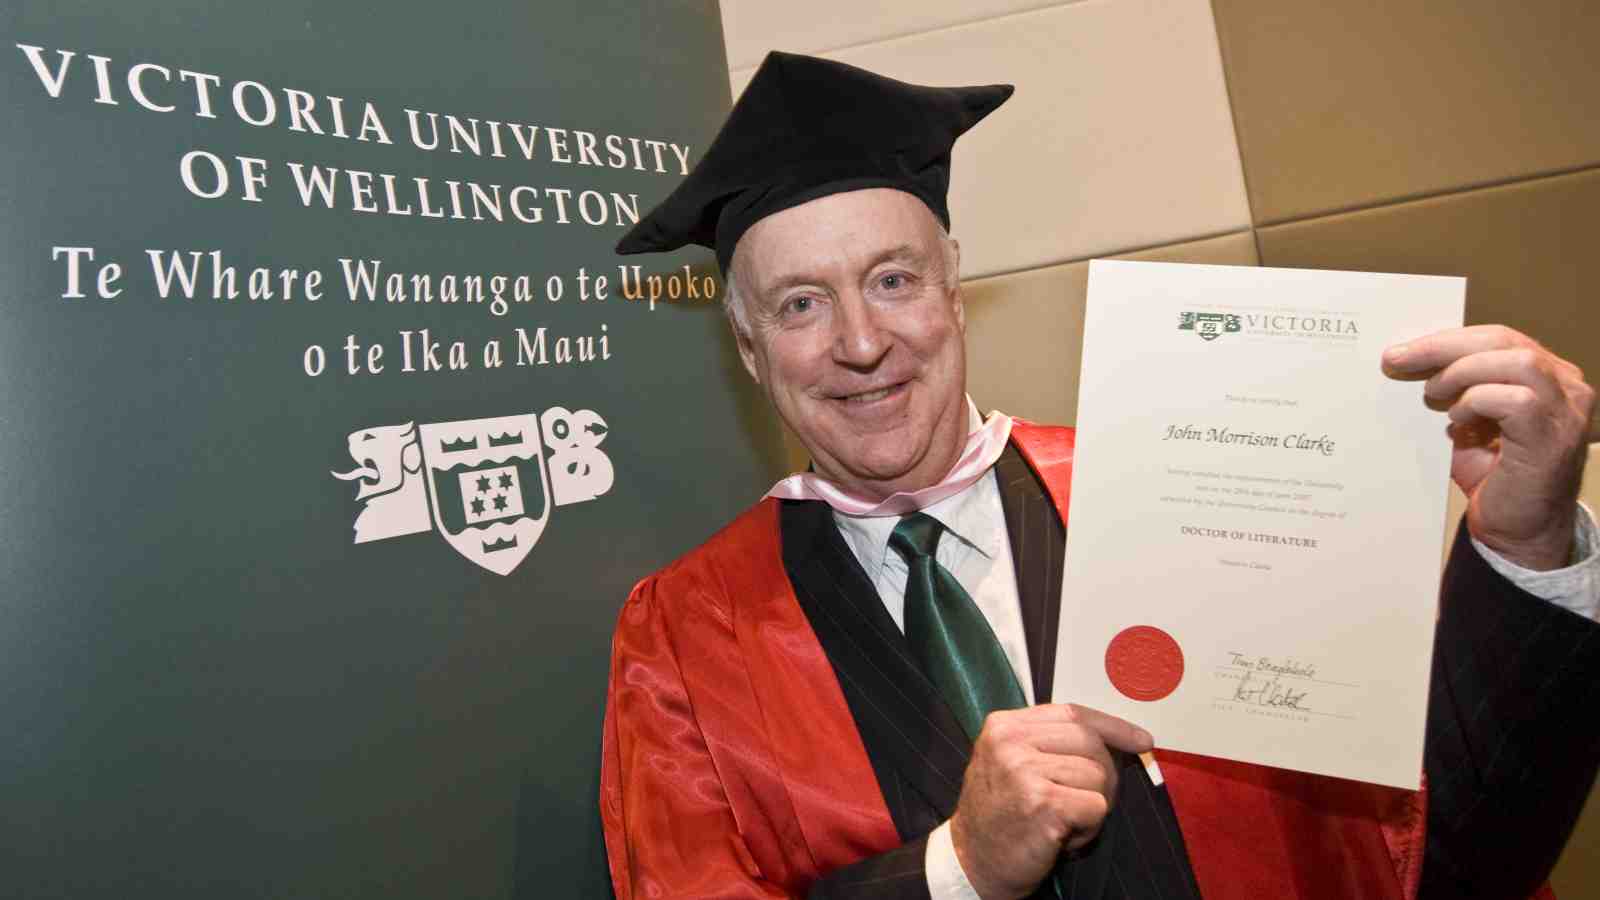 John Clarke holds up his Doctor of Literature.